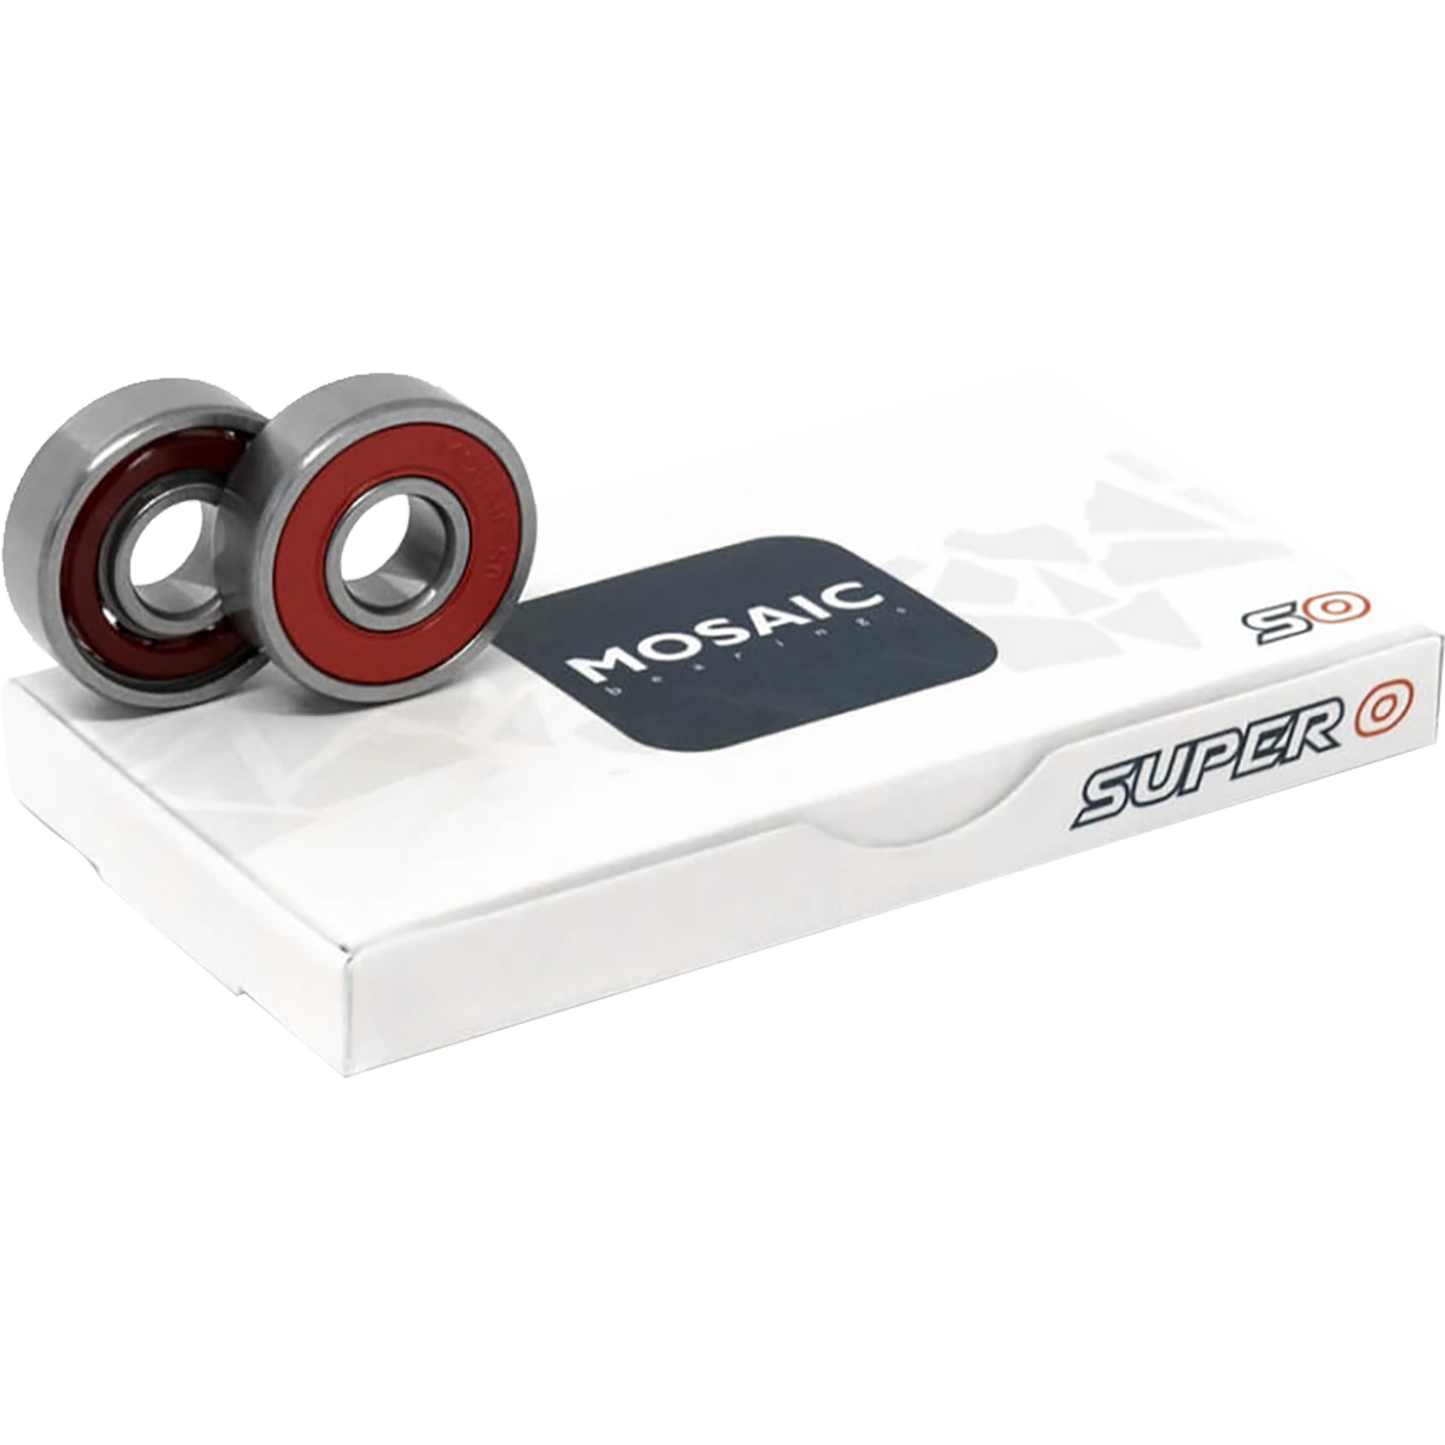 Mosaic Super 0 Abec-5 Bearings Silver/Red Single Set - 8 Pieces